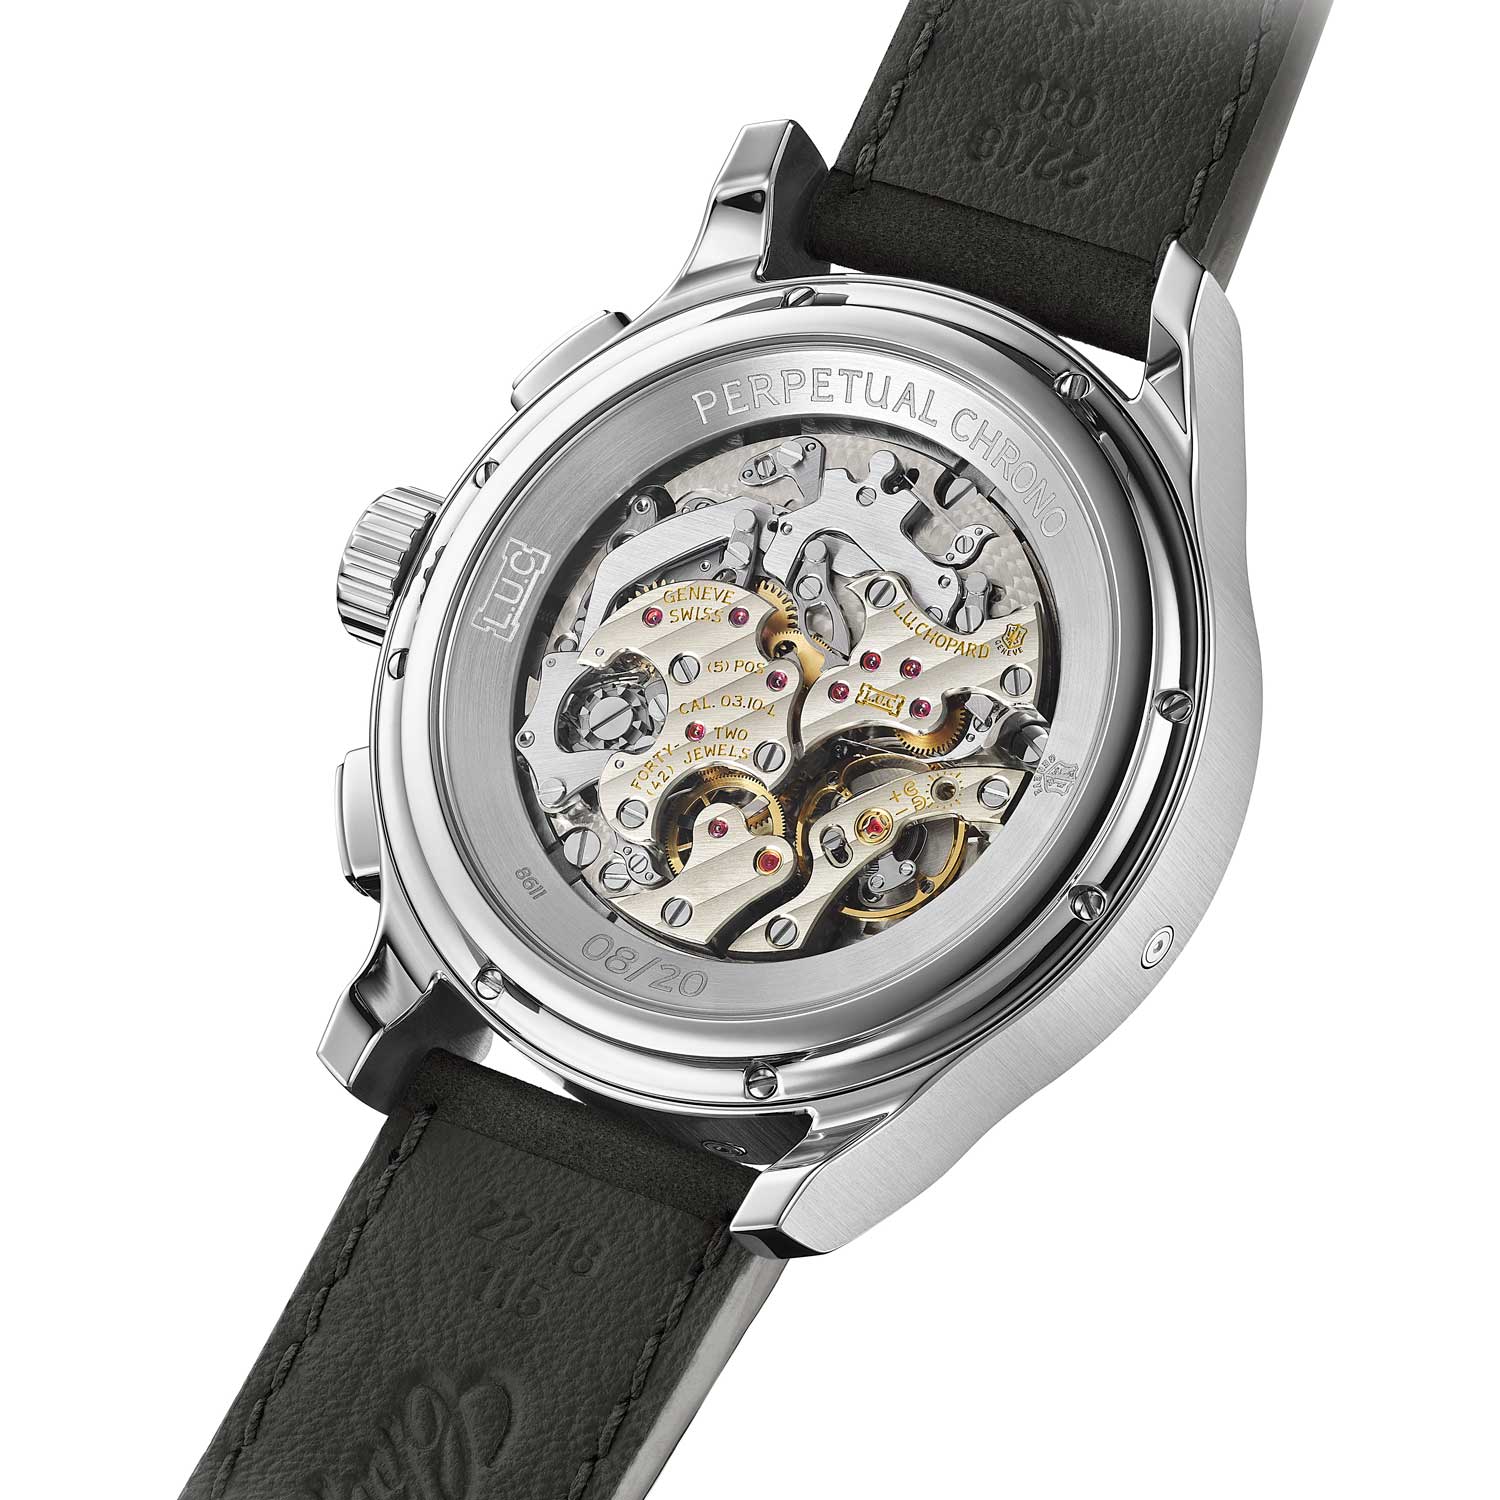 L.U.C Perpetual Chrono – Ref. 168611-3001: in grade 5 titanium fitted with a grey nubuck calfskin strap; numbered 20-piece limited edition